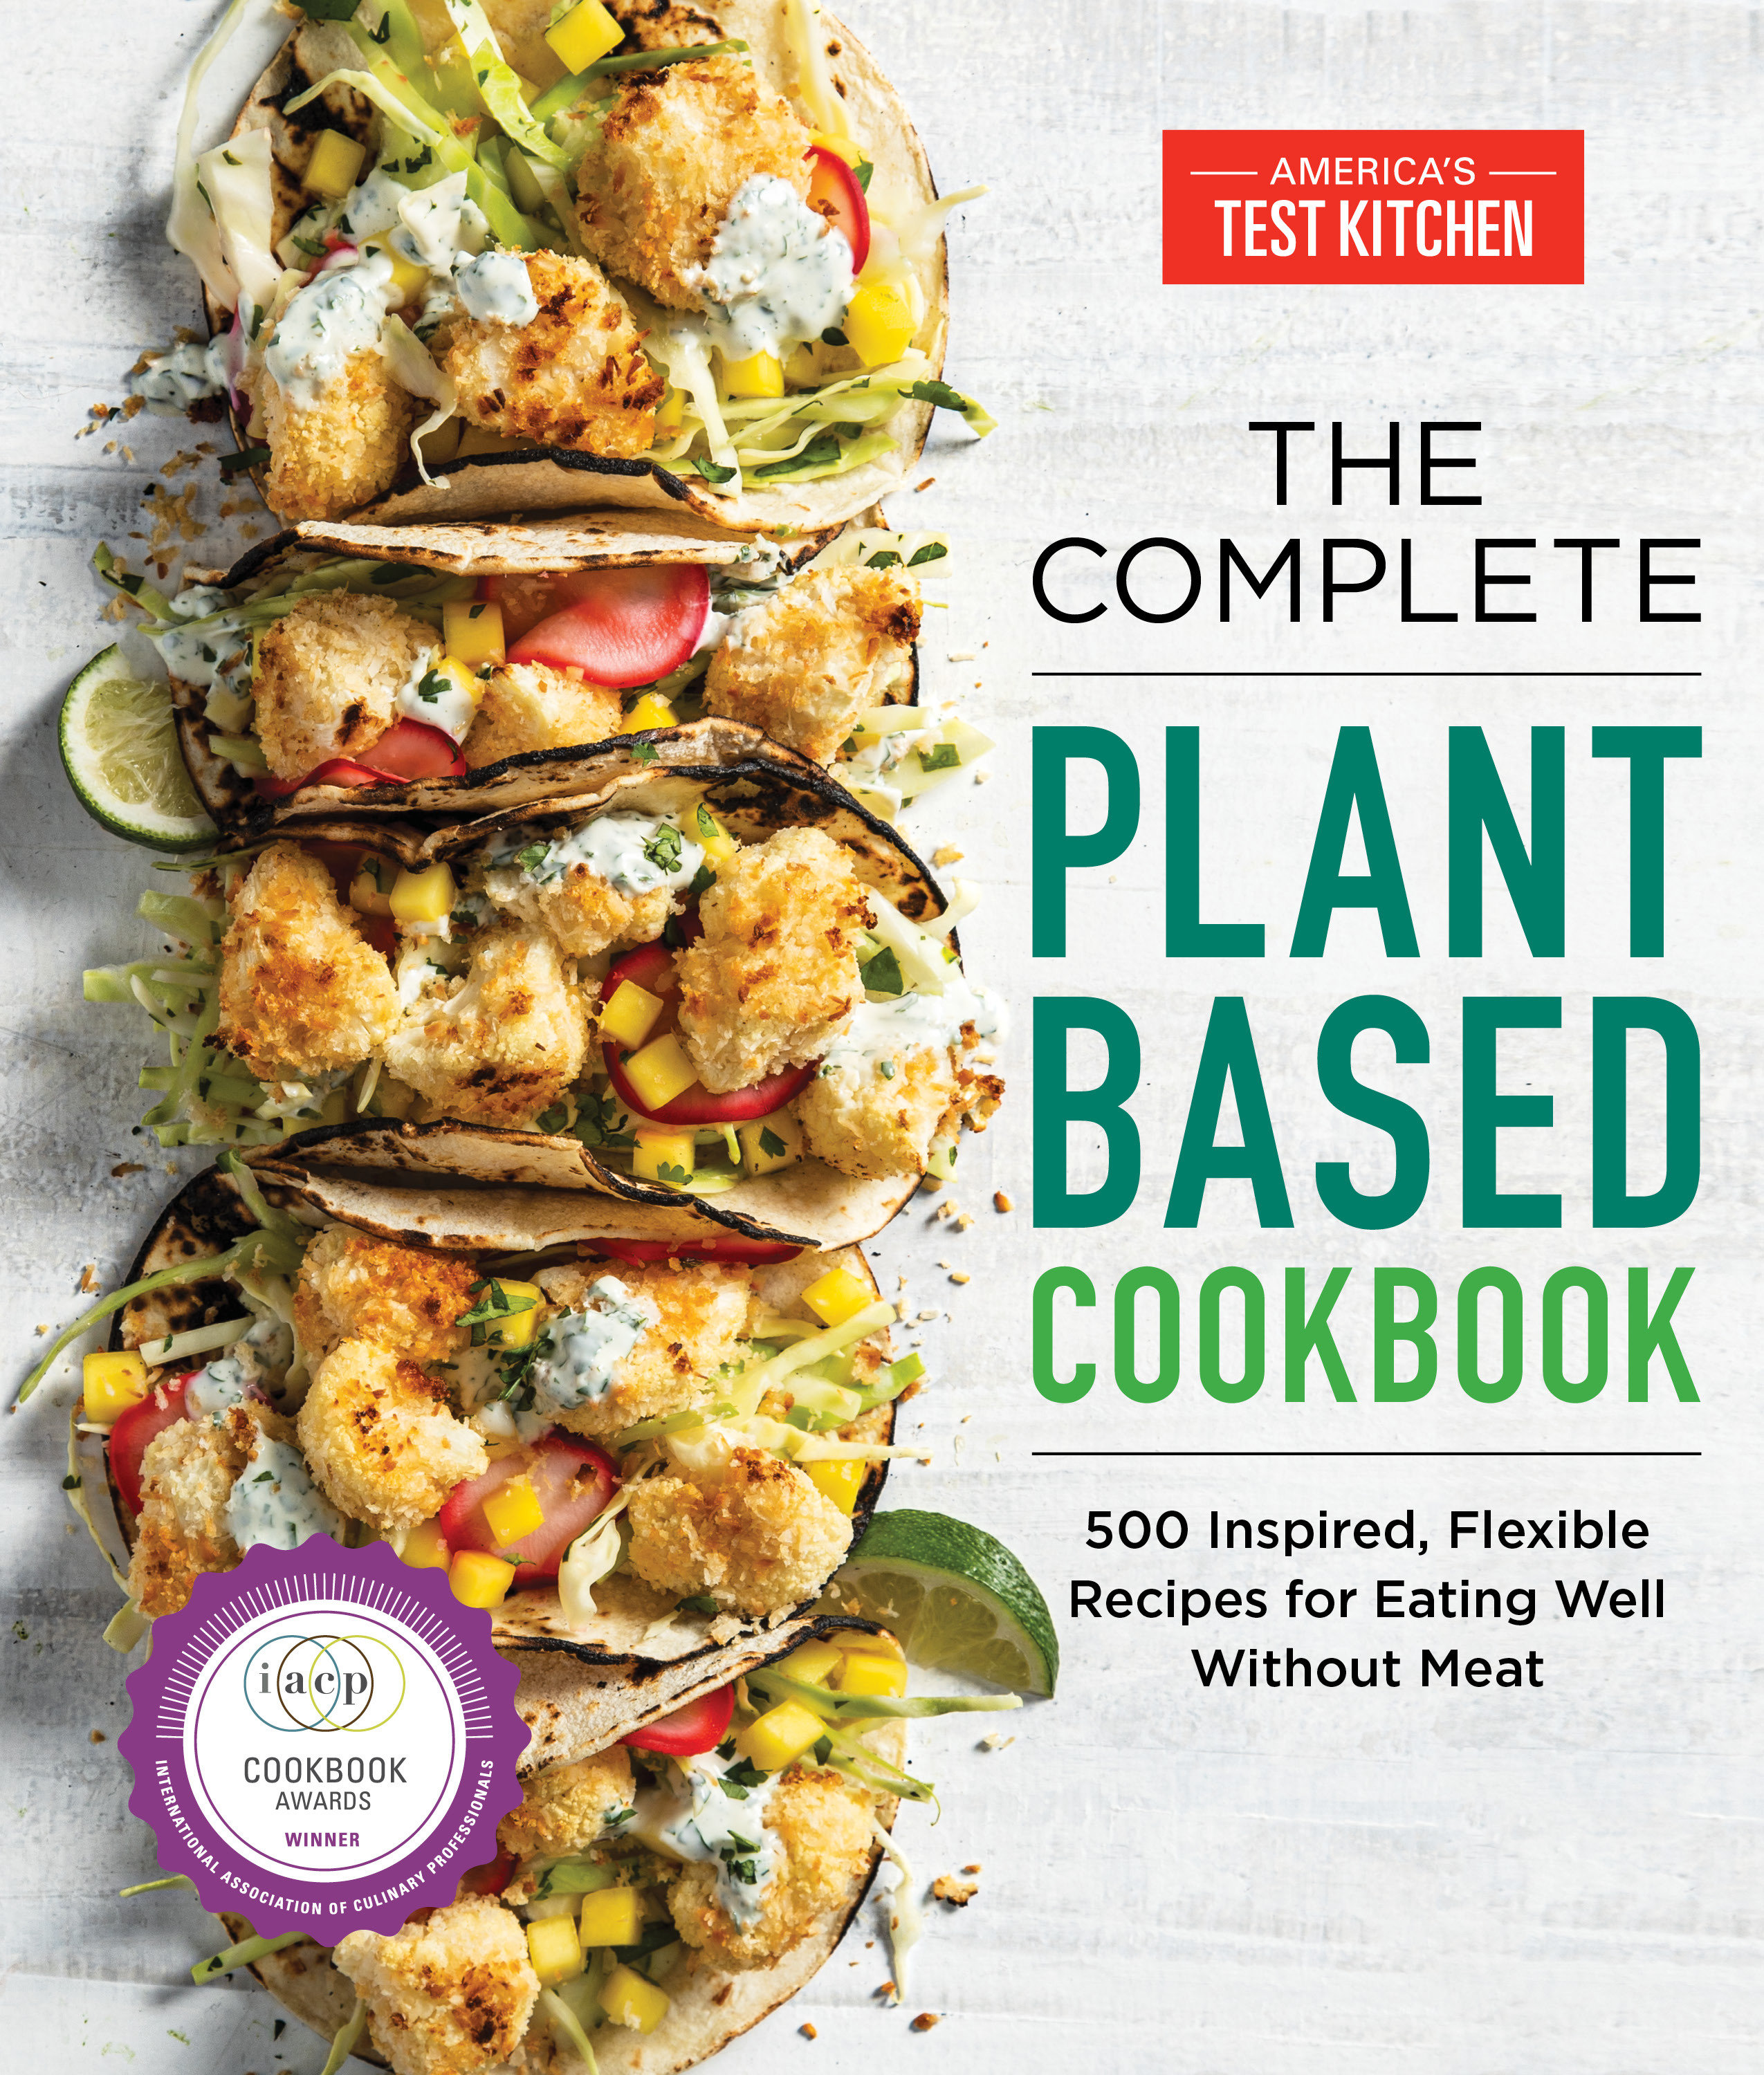 Umschlagbild für The Complete Plant-Based Cookbook [electronic resource] : 500 Inspired, Flexible Recipes for Eating Well Without Meat